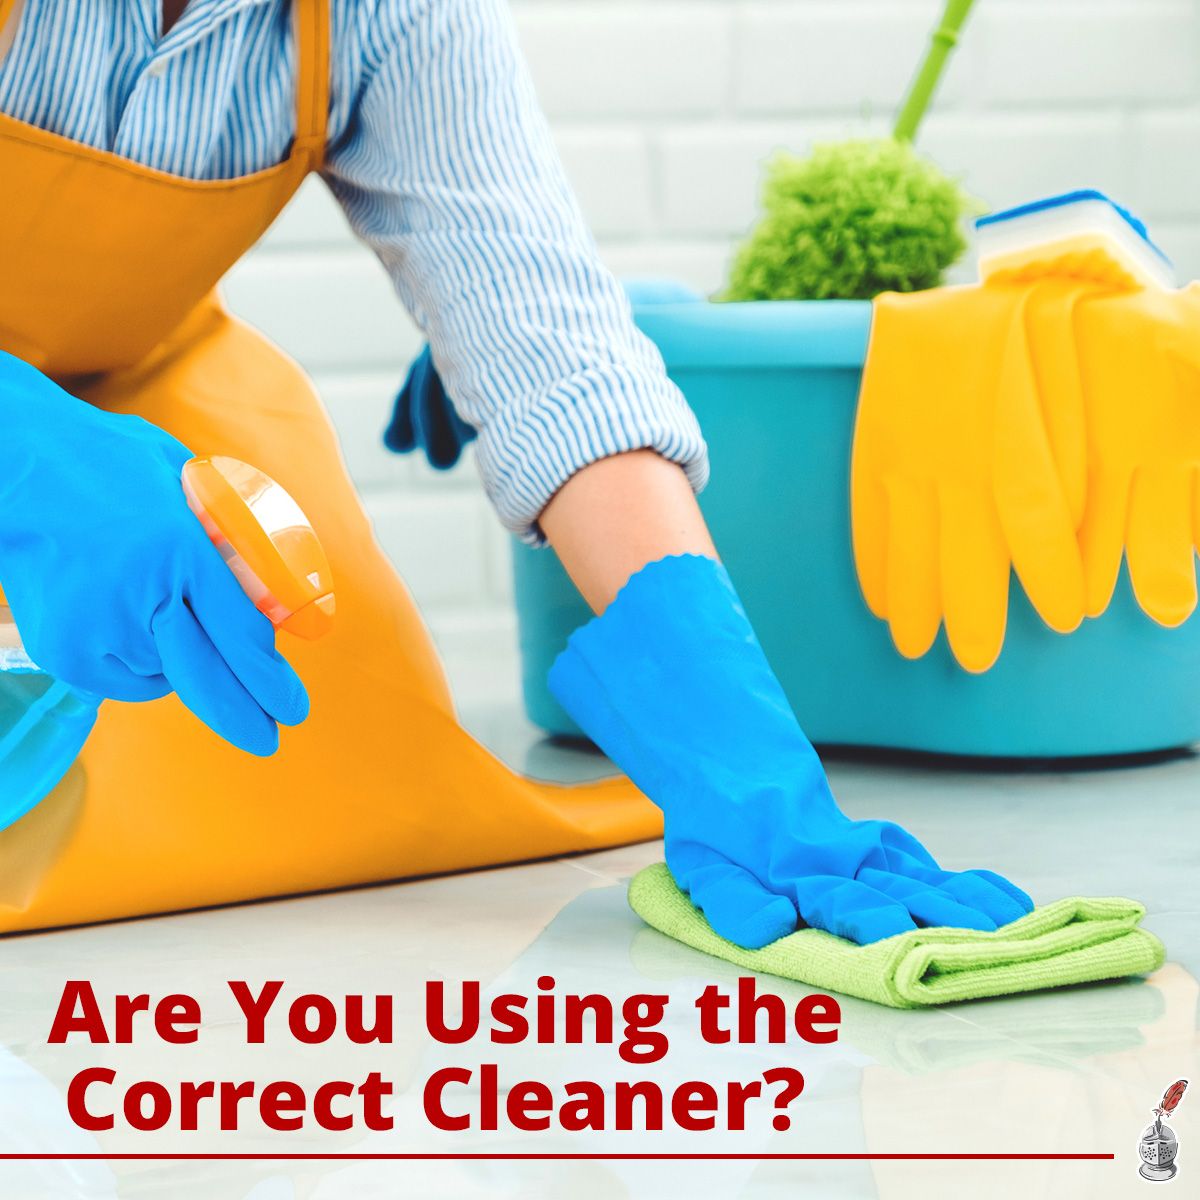 Are Your Using the Correct Cleaner?